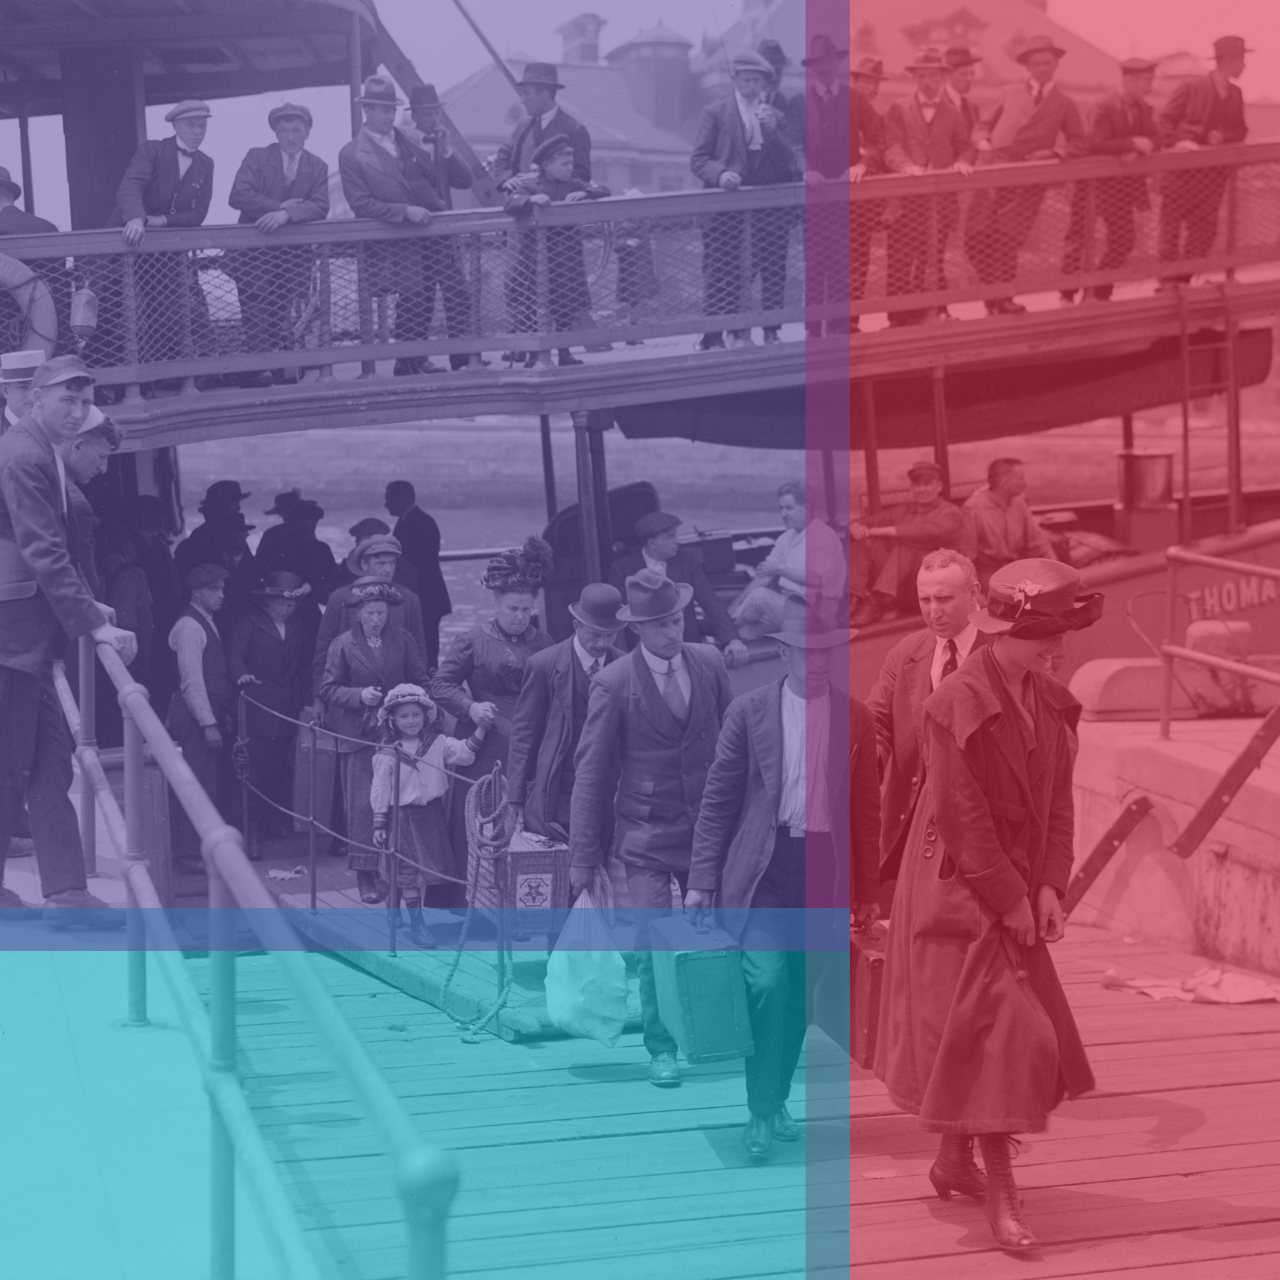 Immigrants disembarking at Ellis Island overlaid with the library colors.